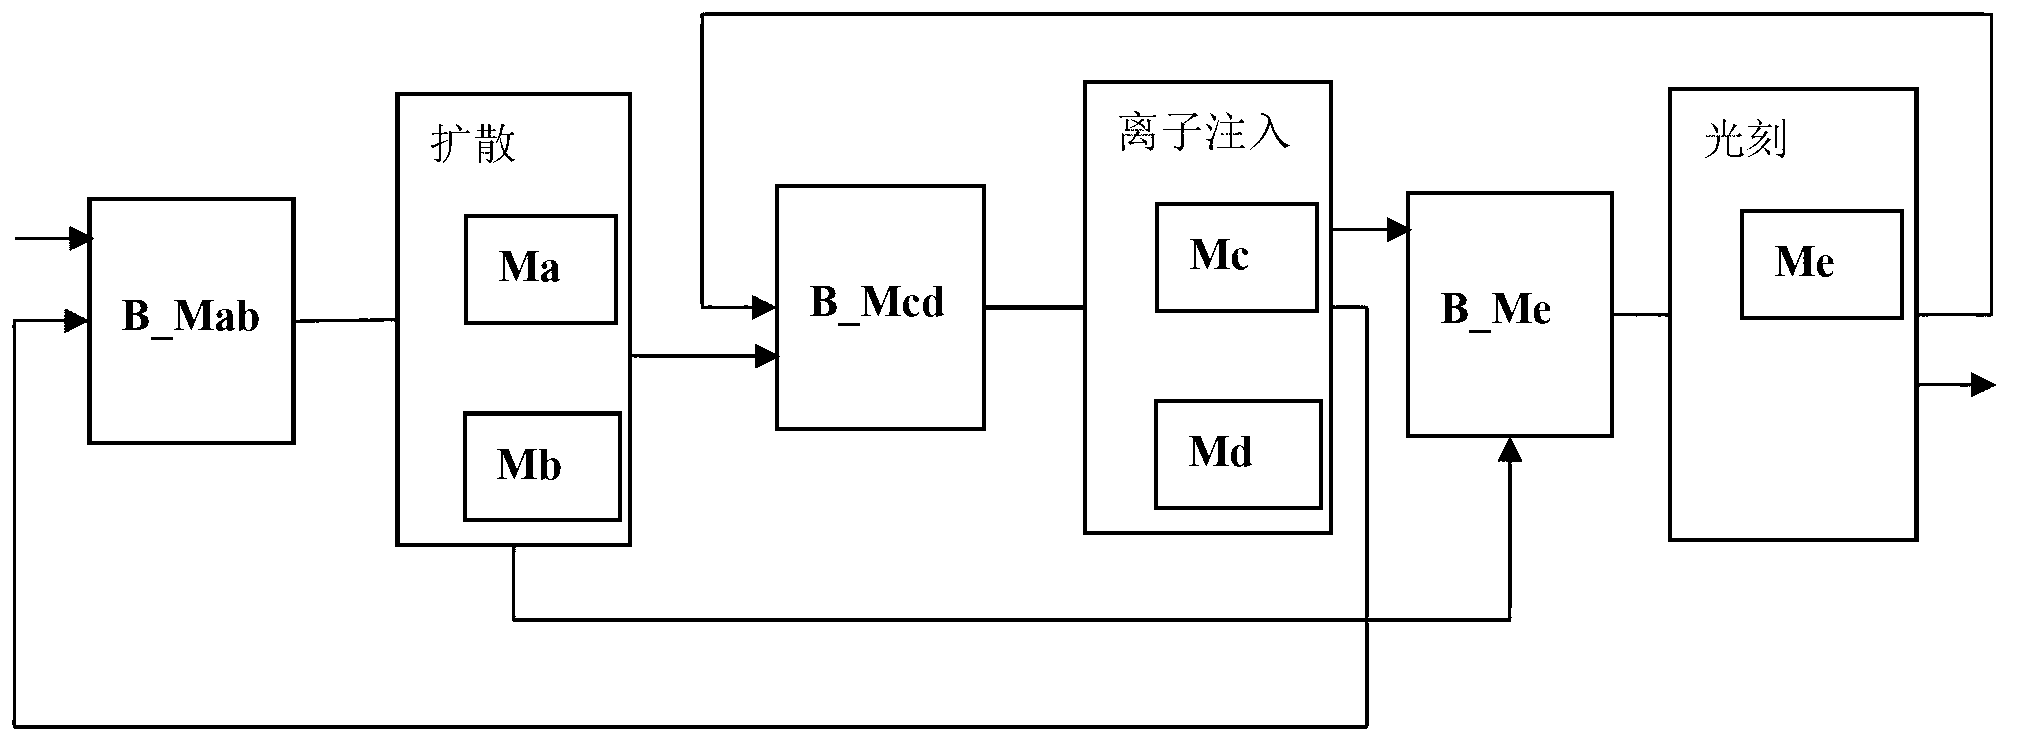 Performance prediction method applicable to dynamic scheduling for semiconductor production line